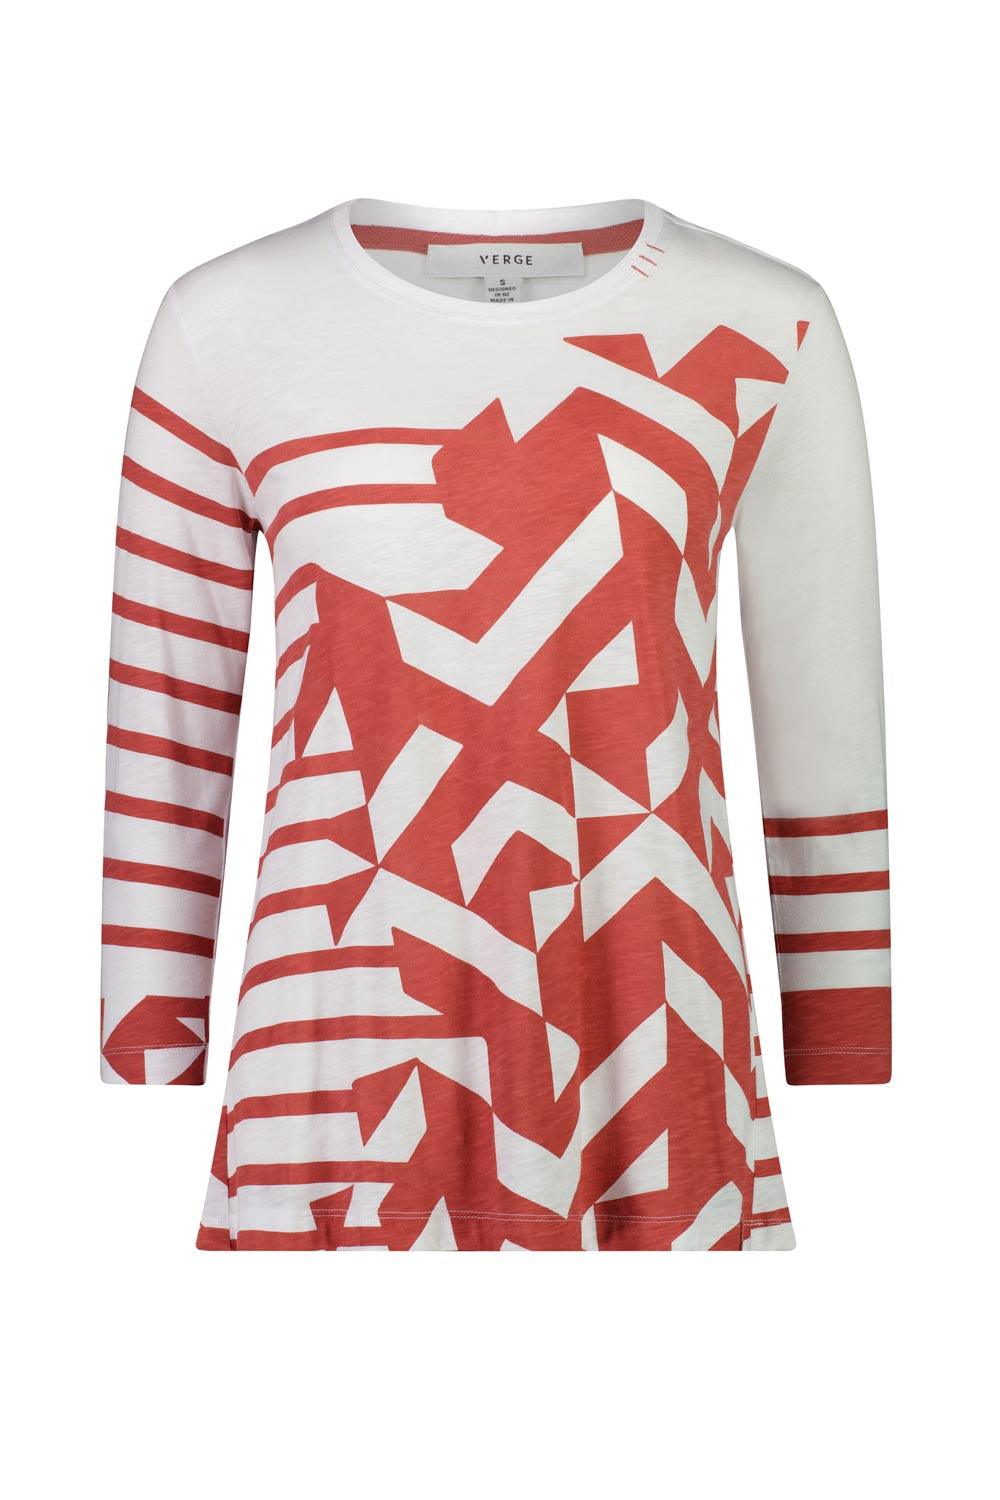 Rhianna Top - White/Washed Red - Tee VERGE